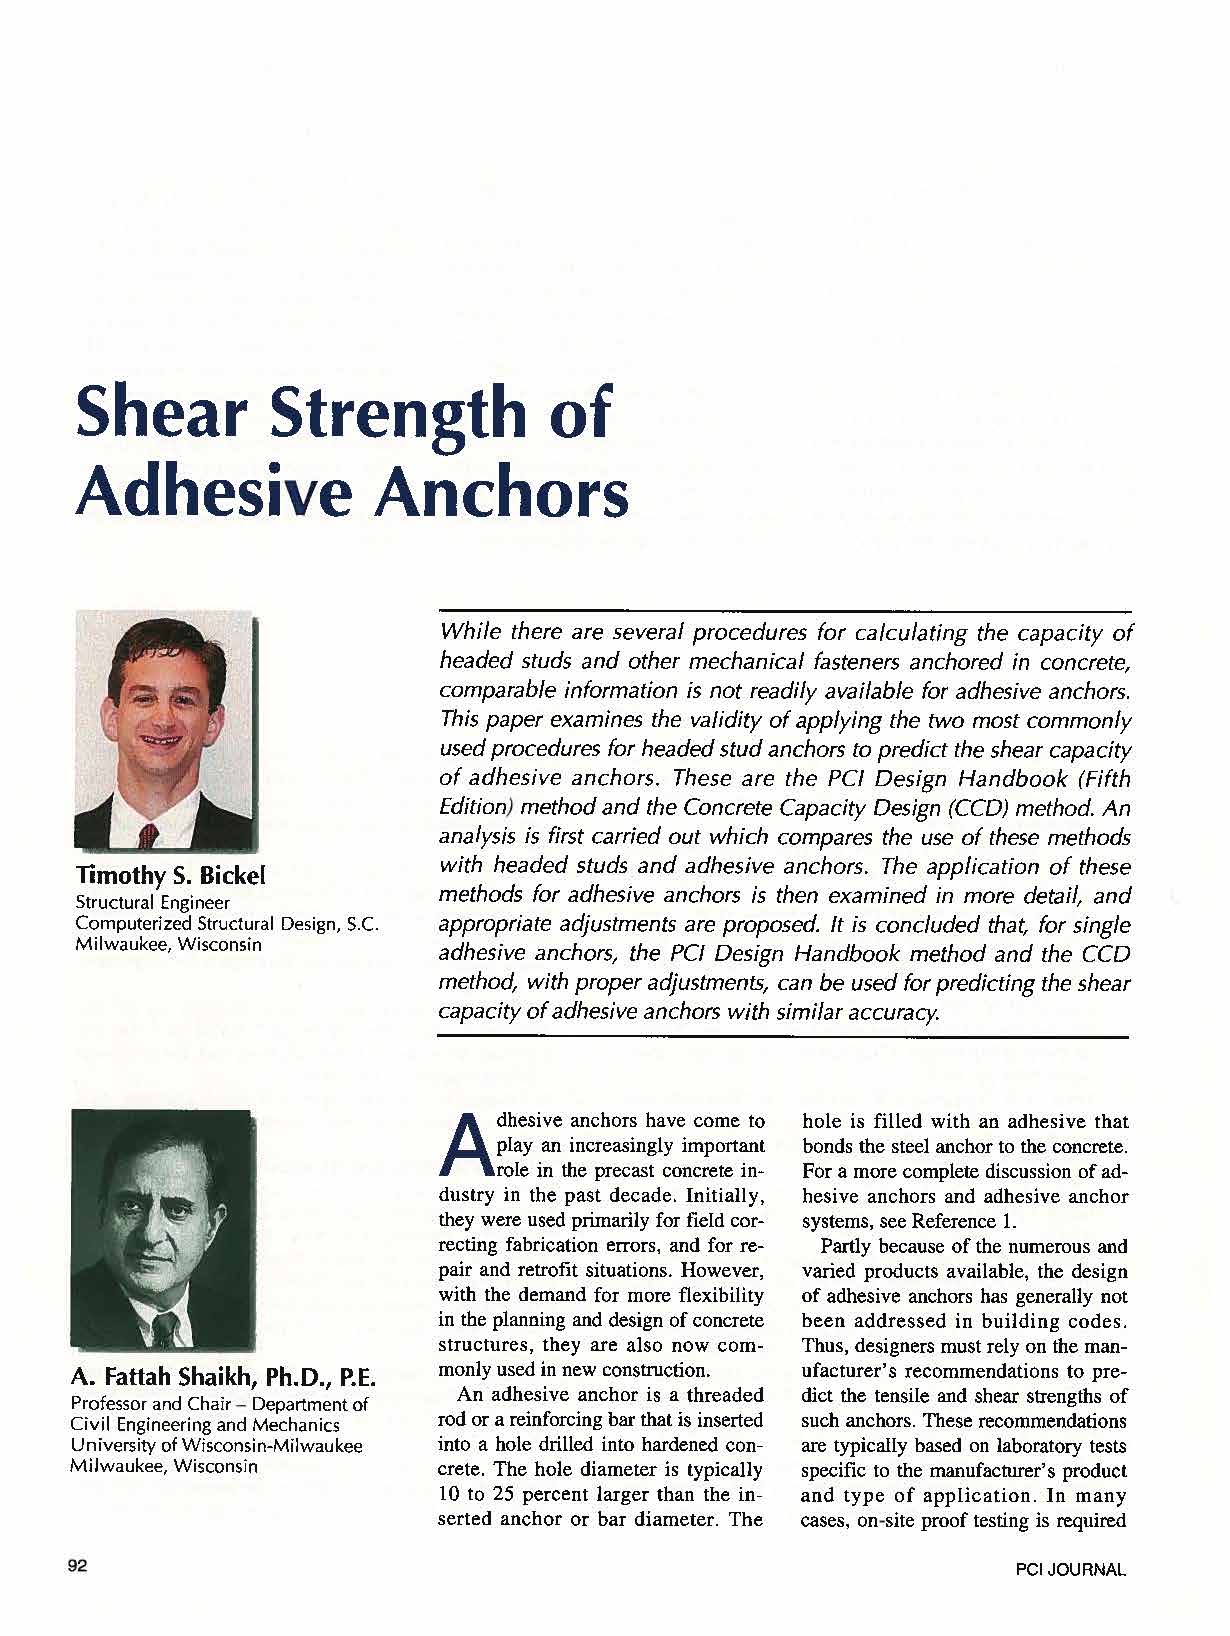 Shear Strength of Adhesive Anchors | Publication by Tim Bickle | CSD Structural Engineers